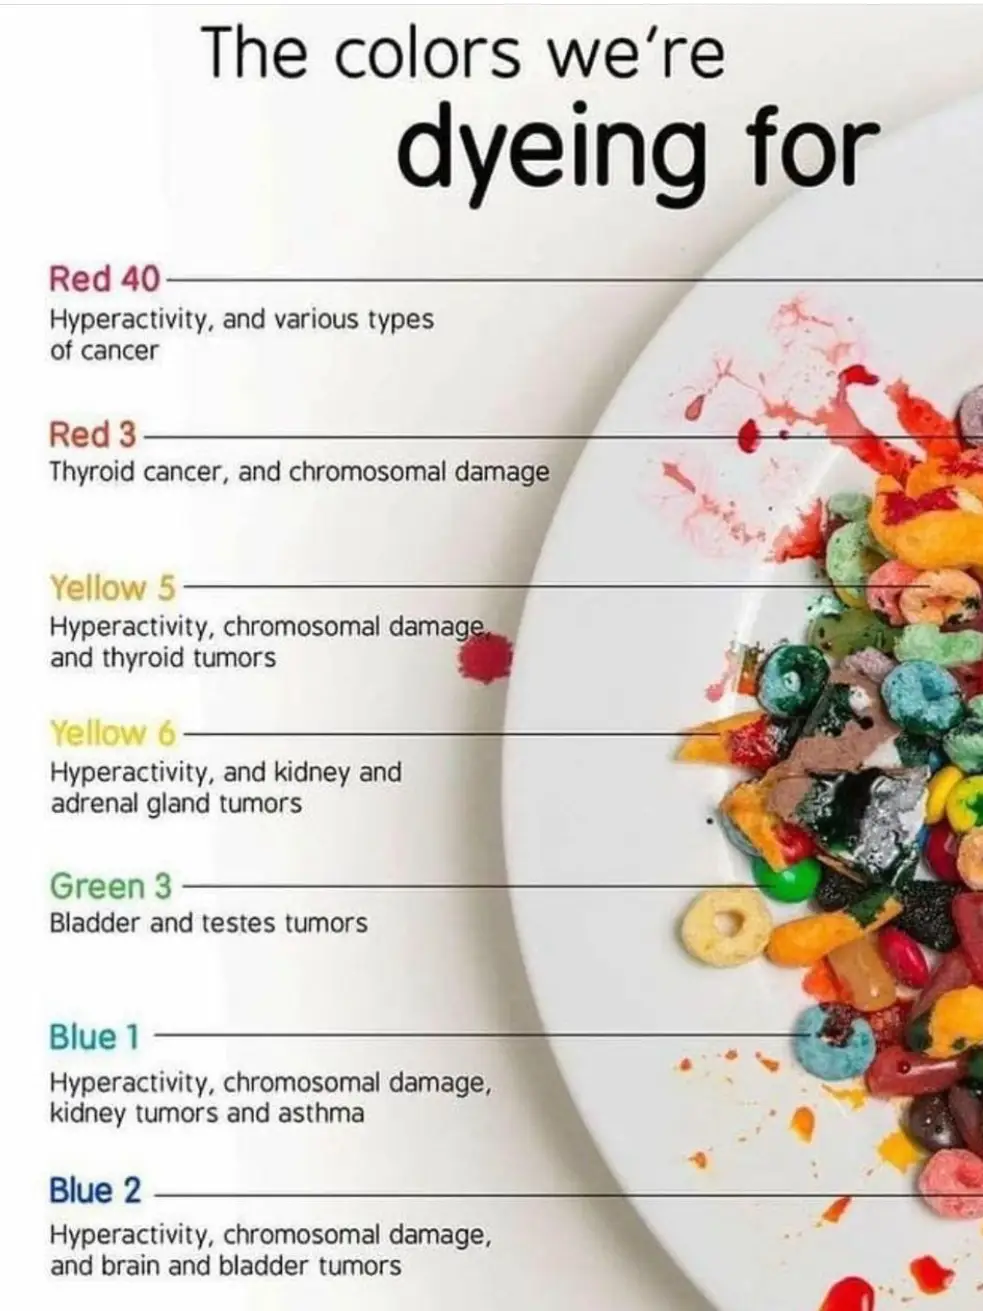 Food Coloring and Hyperactivity - Lemon8 Search